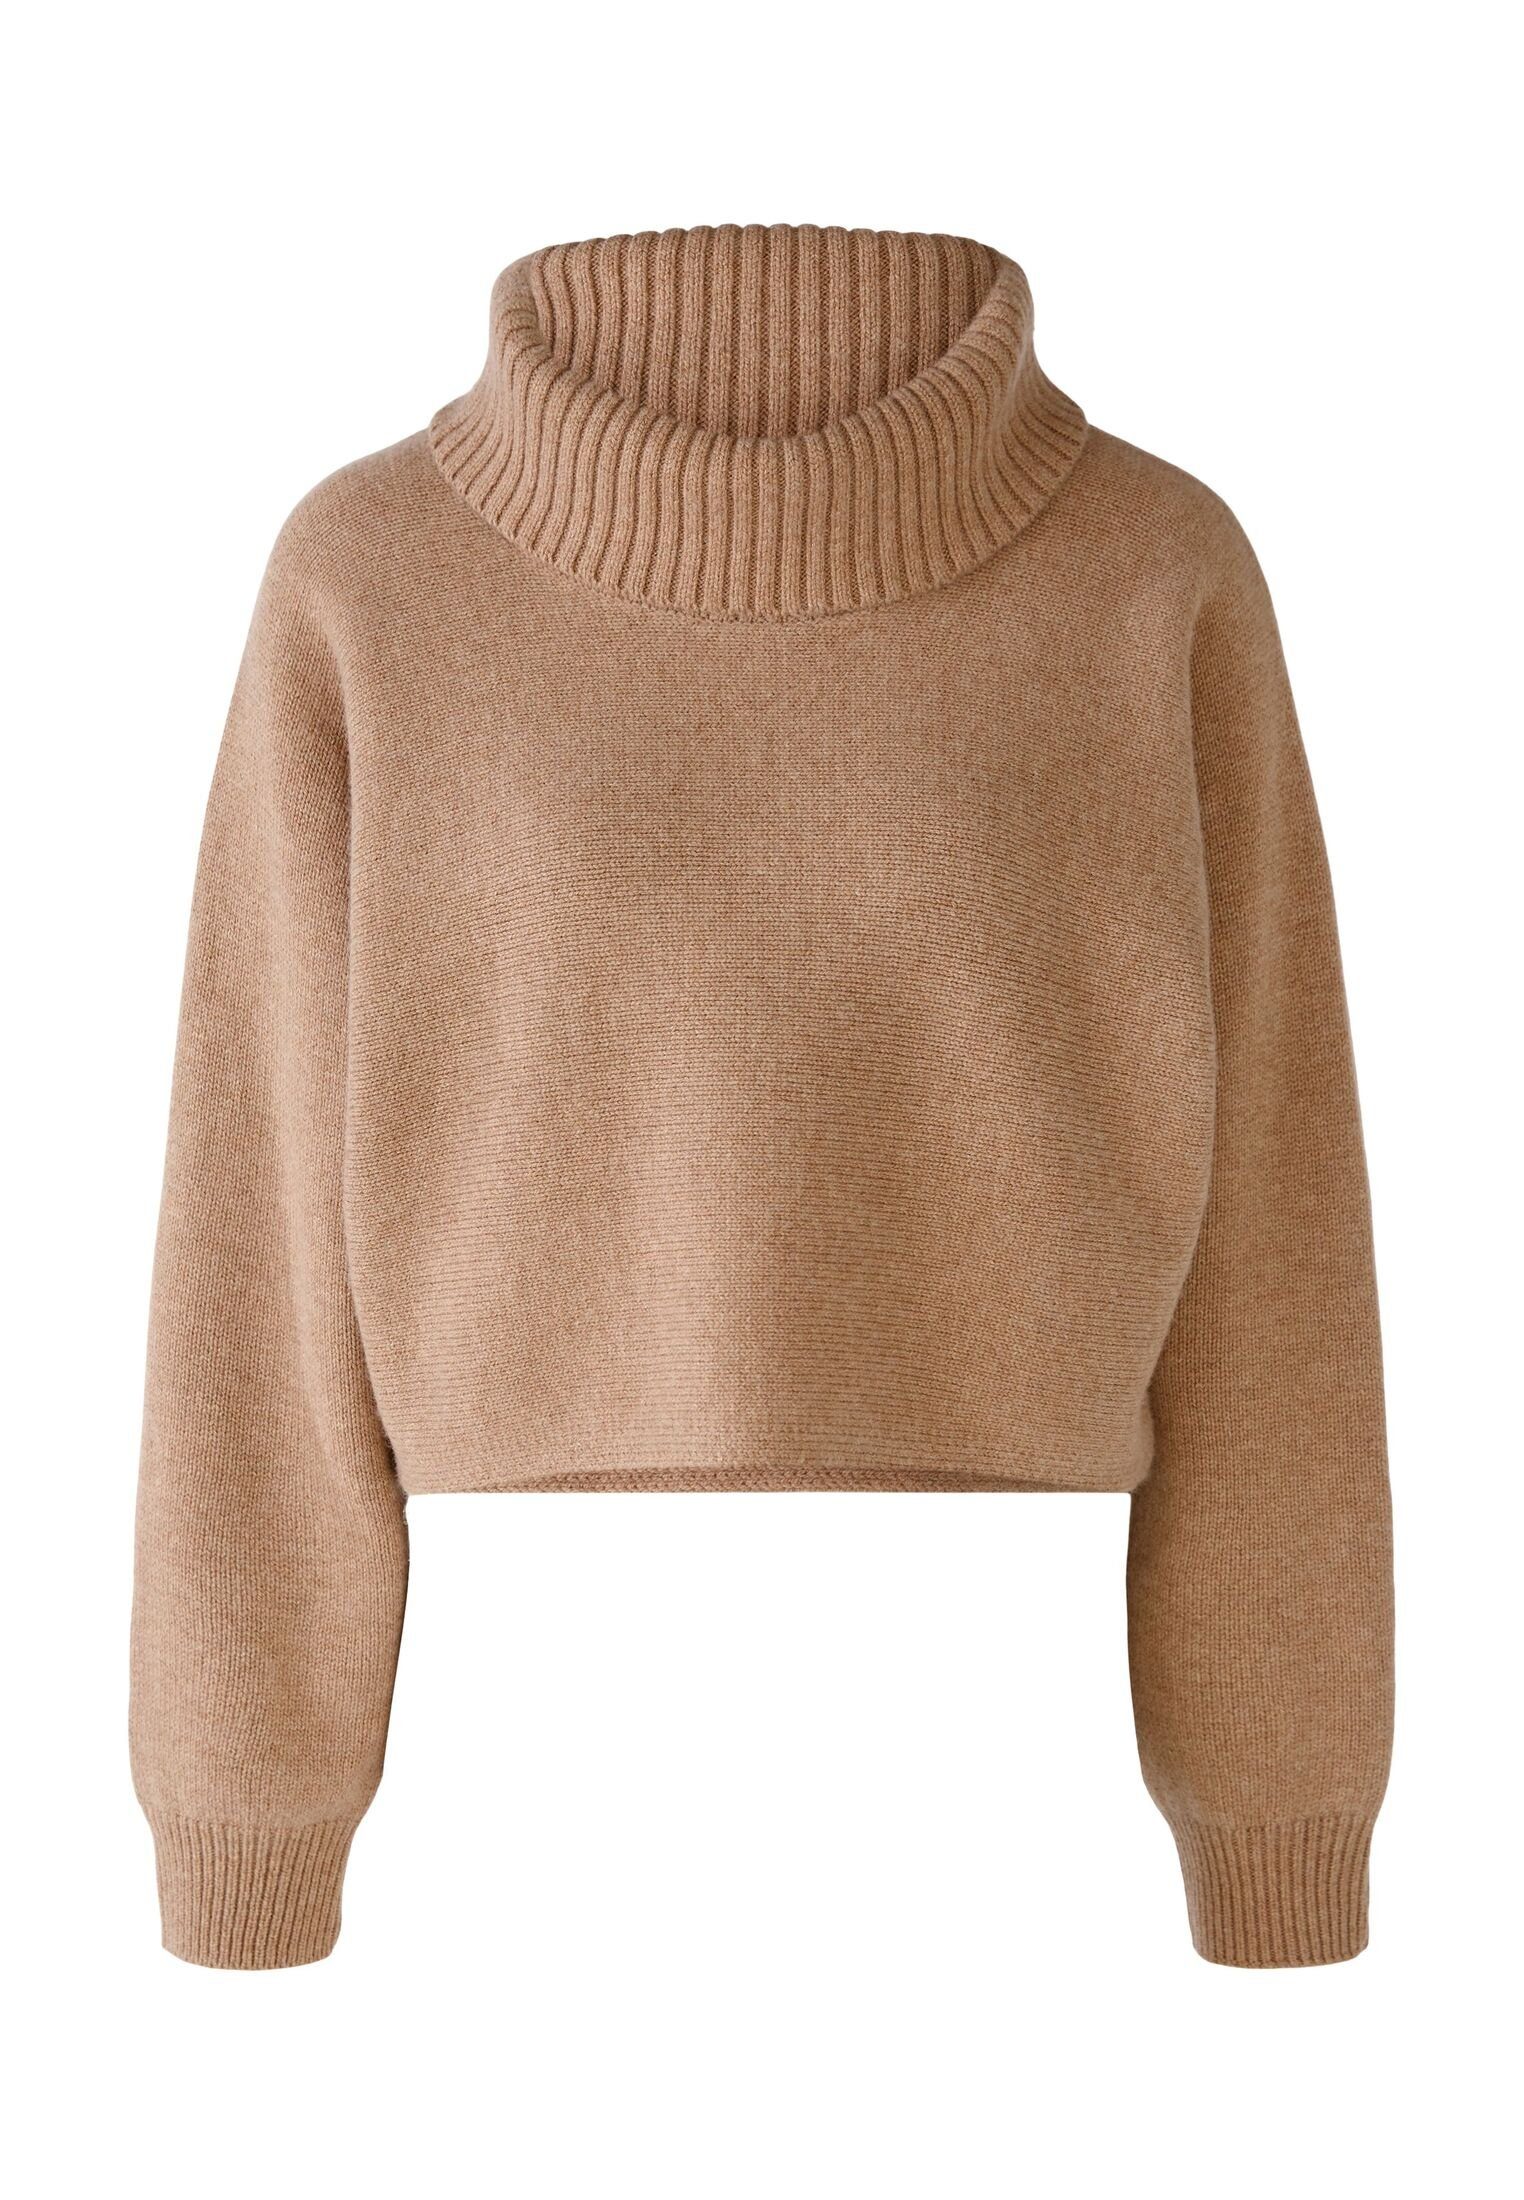 Oui Strickpullover Pullover Wollmischung camel